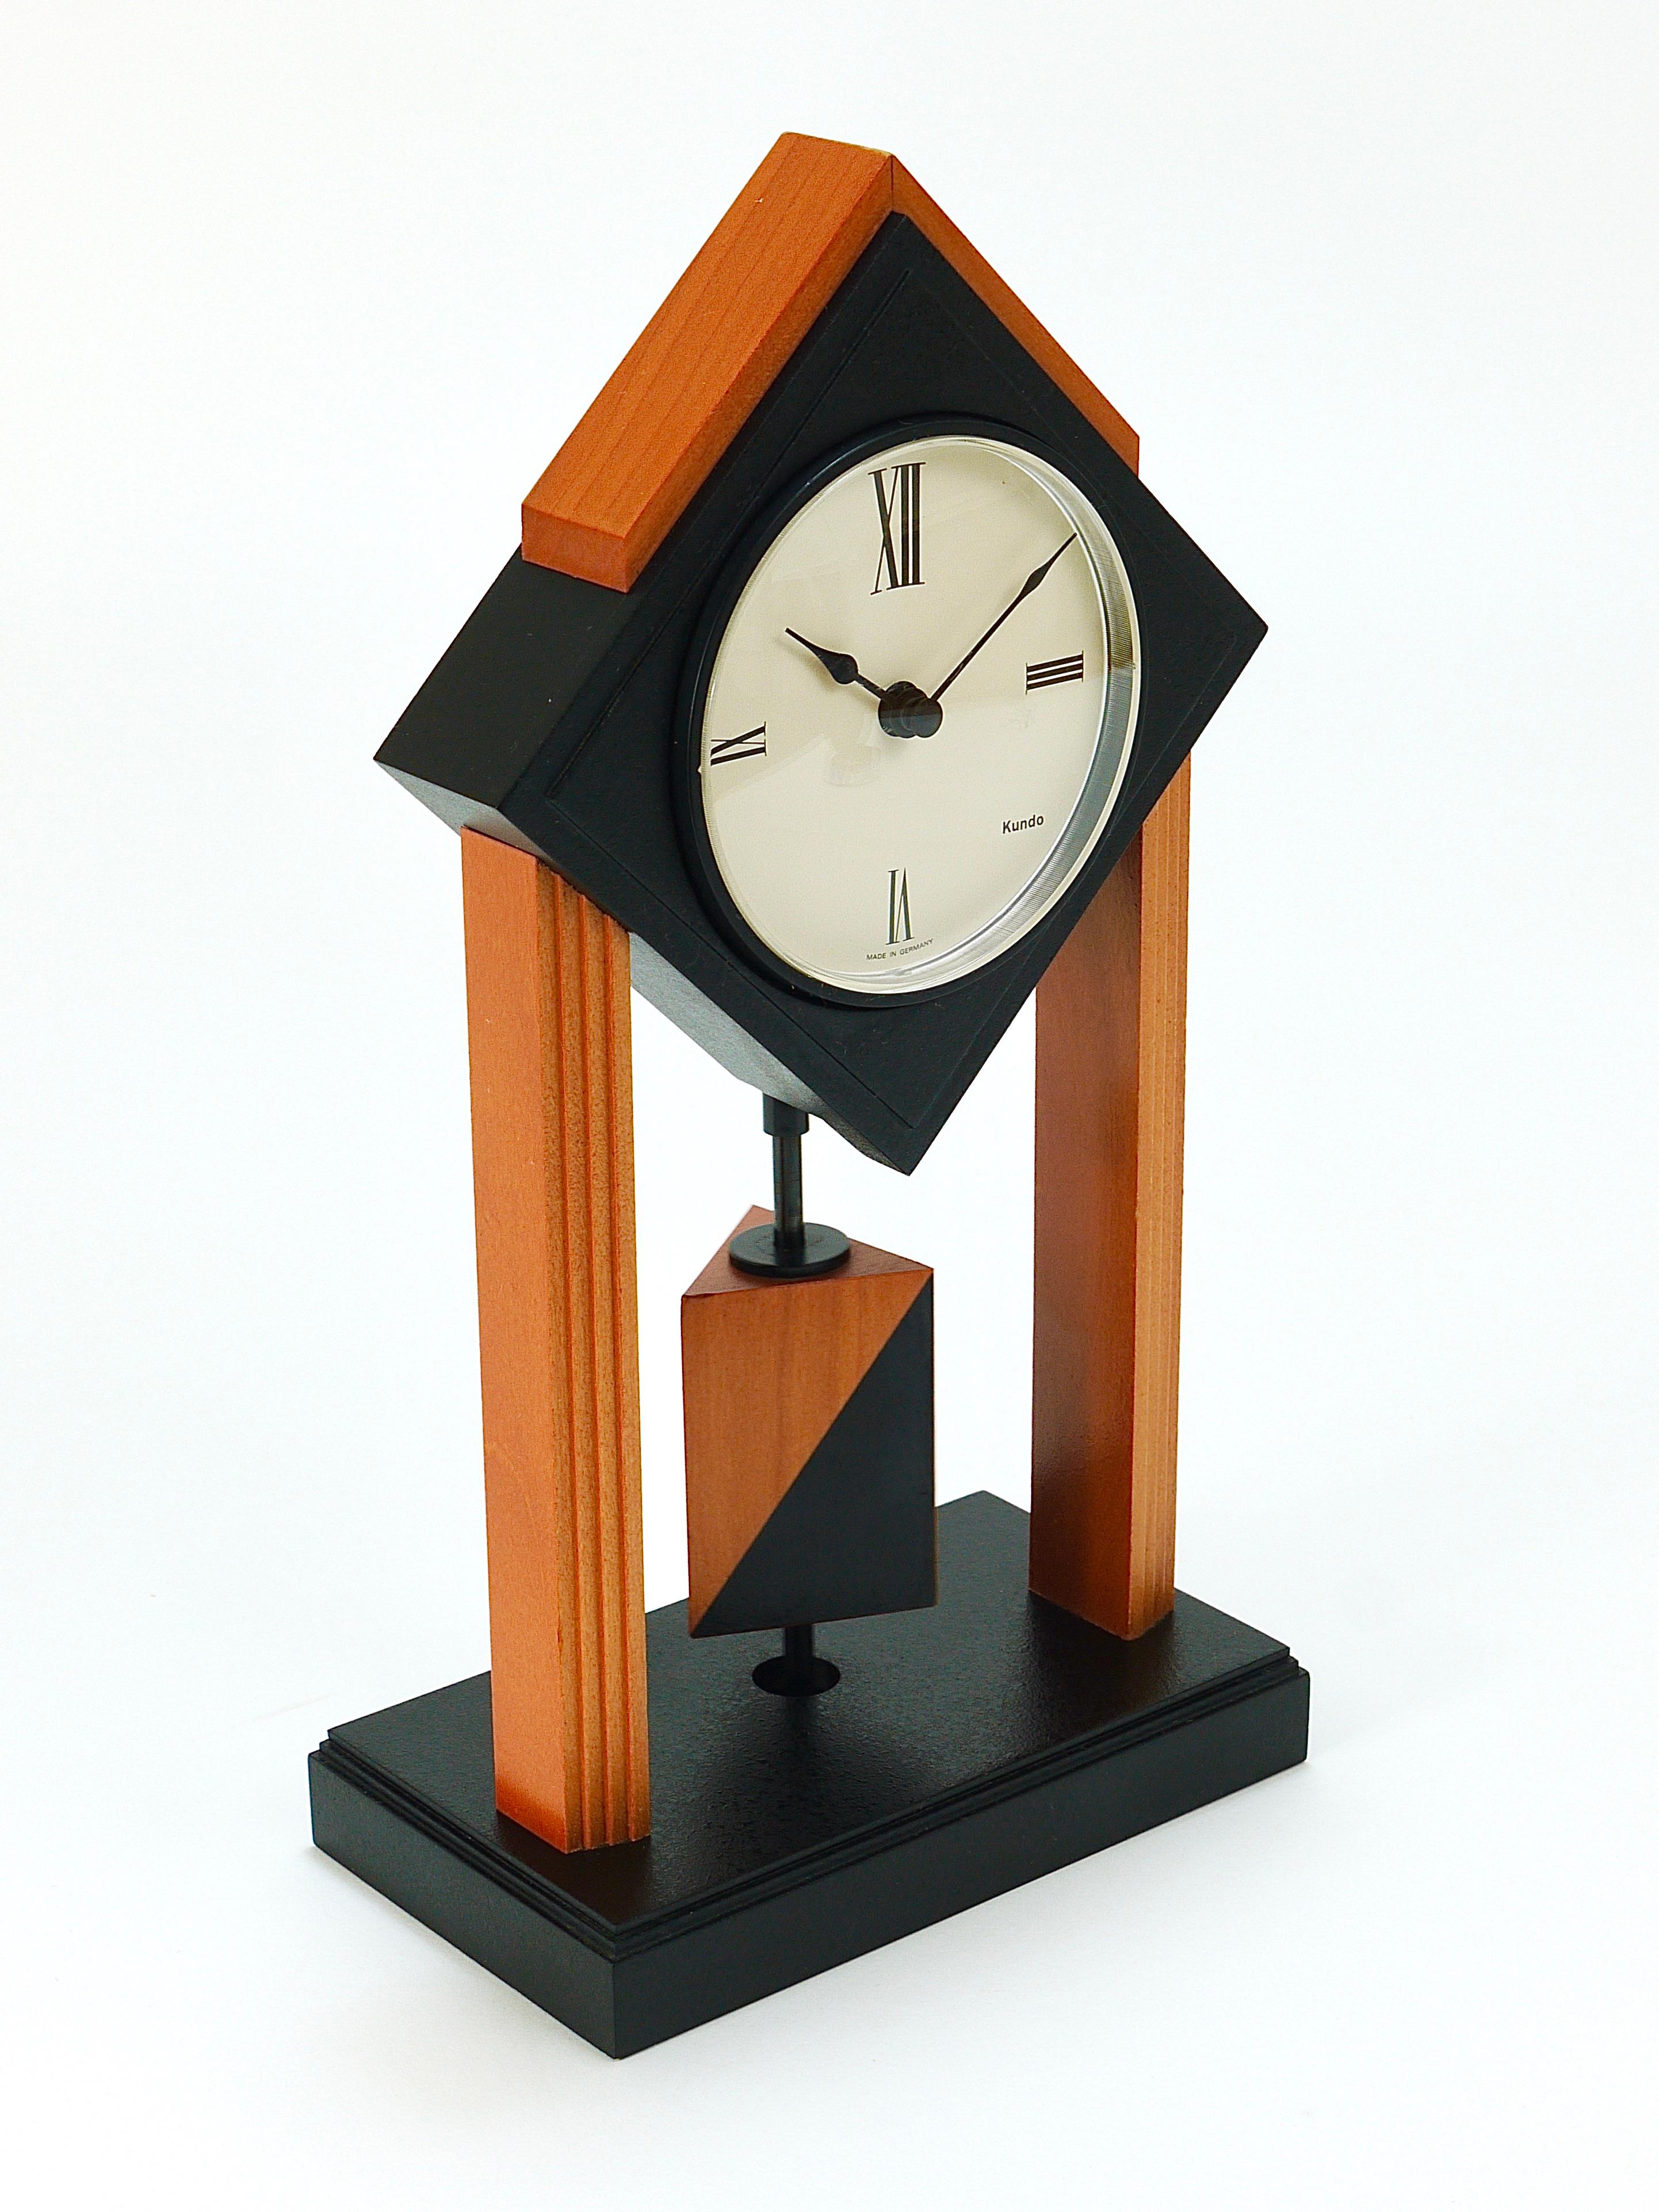 Late 20th Century Postmodern Memphis Milano Style Torsion Pendulum Table Clock by Kundo Germany For Sale